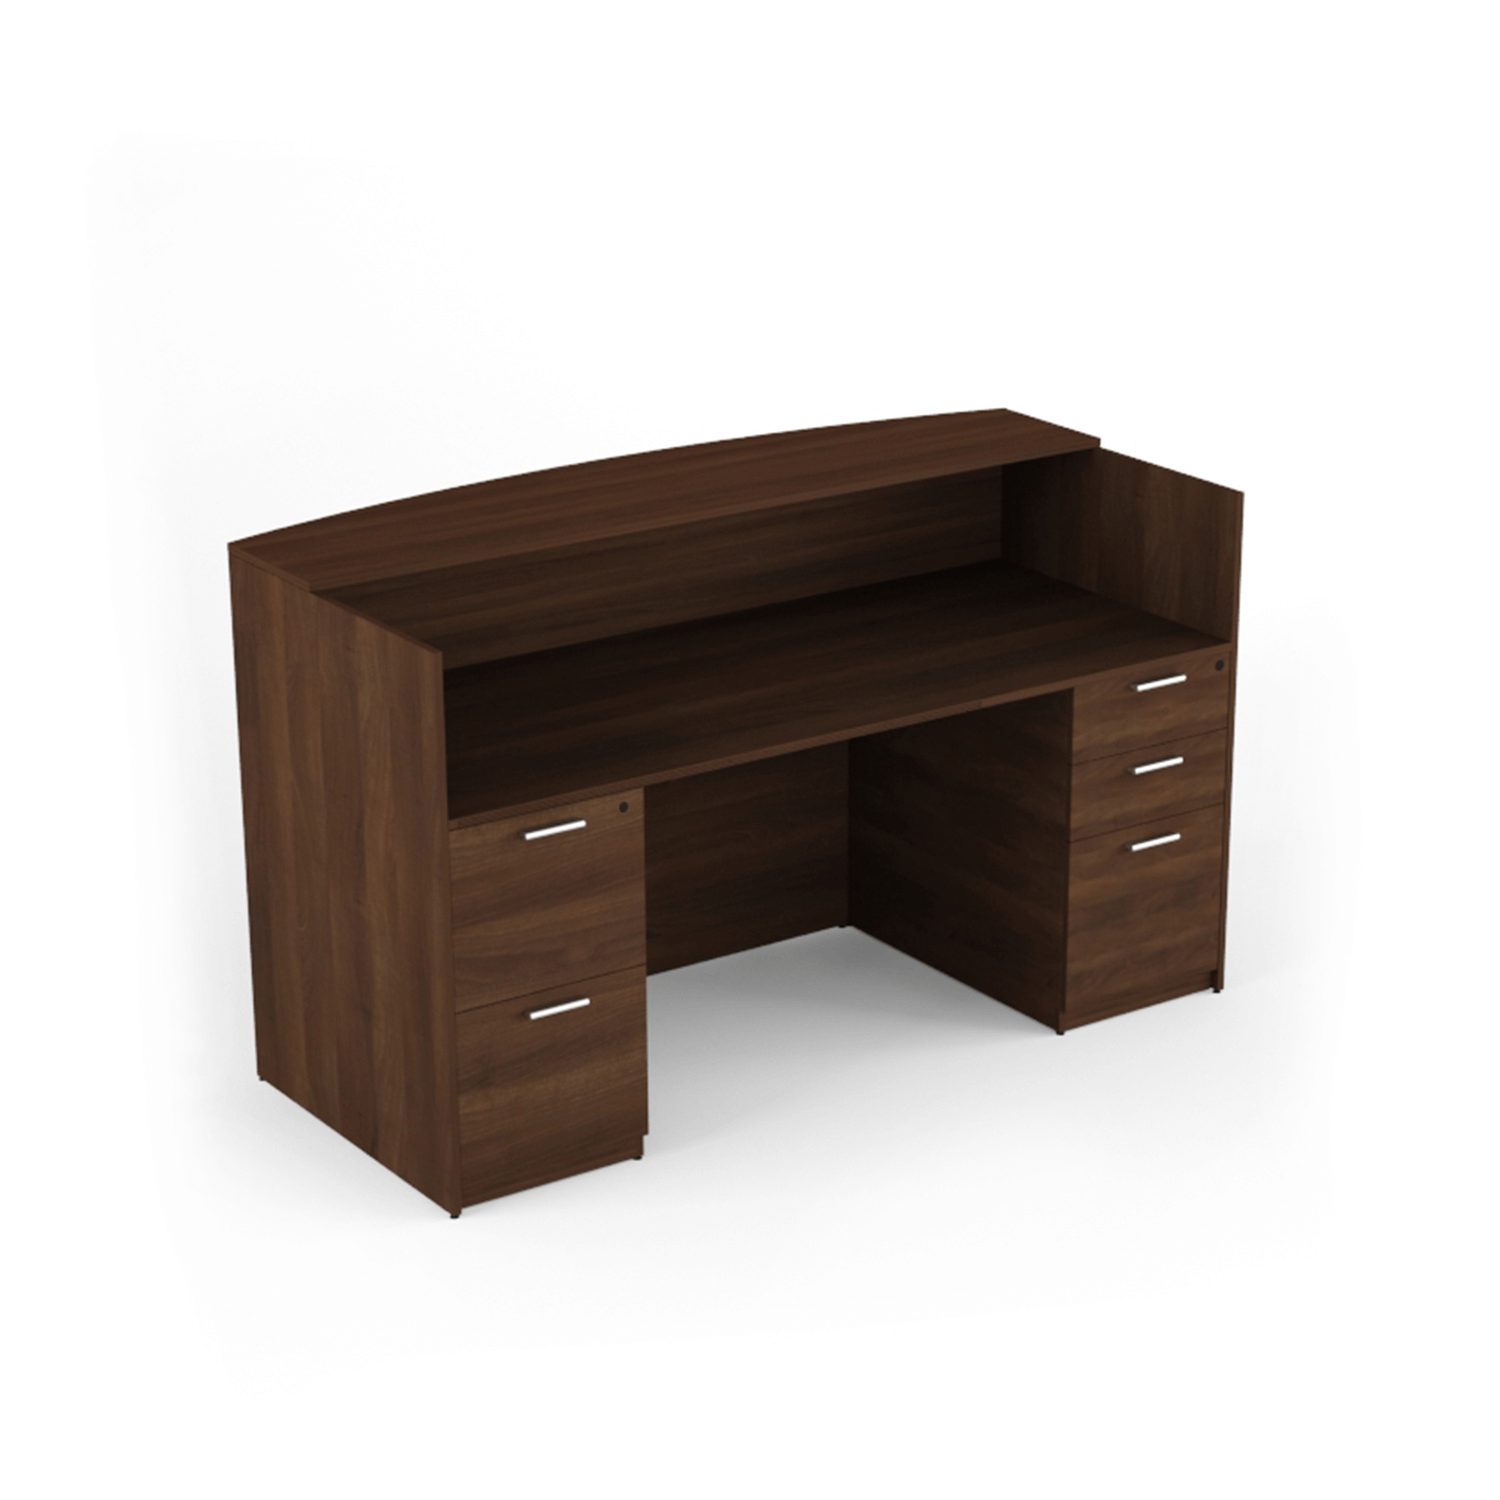 Product-Kai-Walnut-Reception-Desk-with-Double-Full-Peds